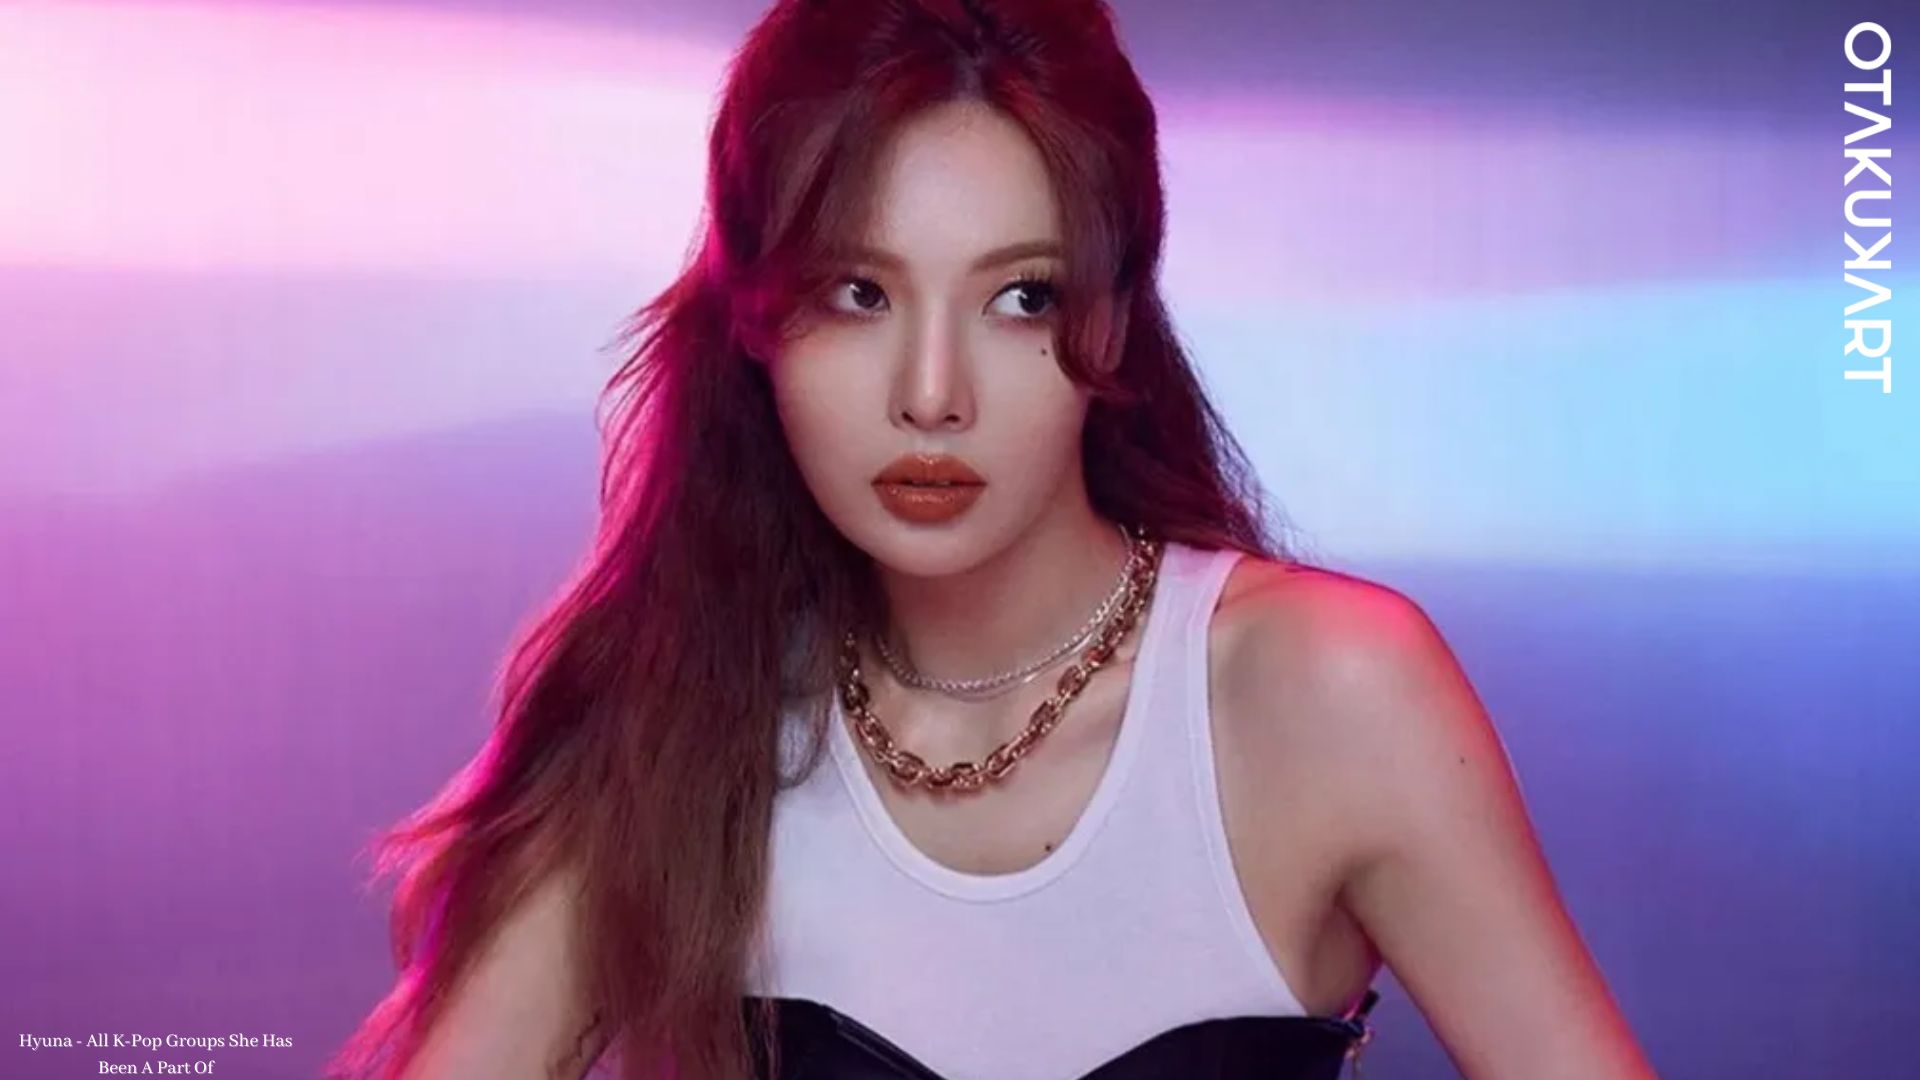 Hyuna – Which K-Pop Group Have the Artist Been Part Of?